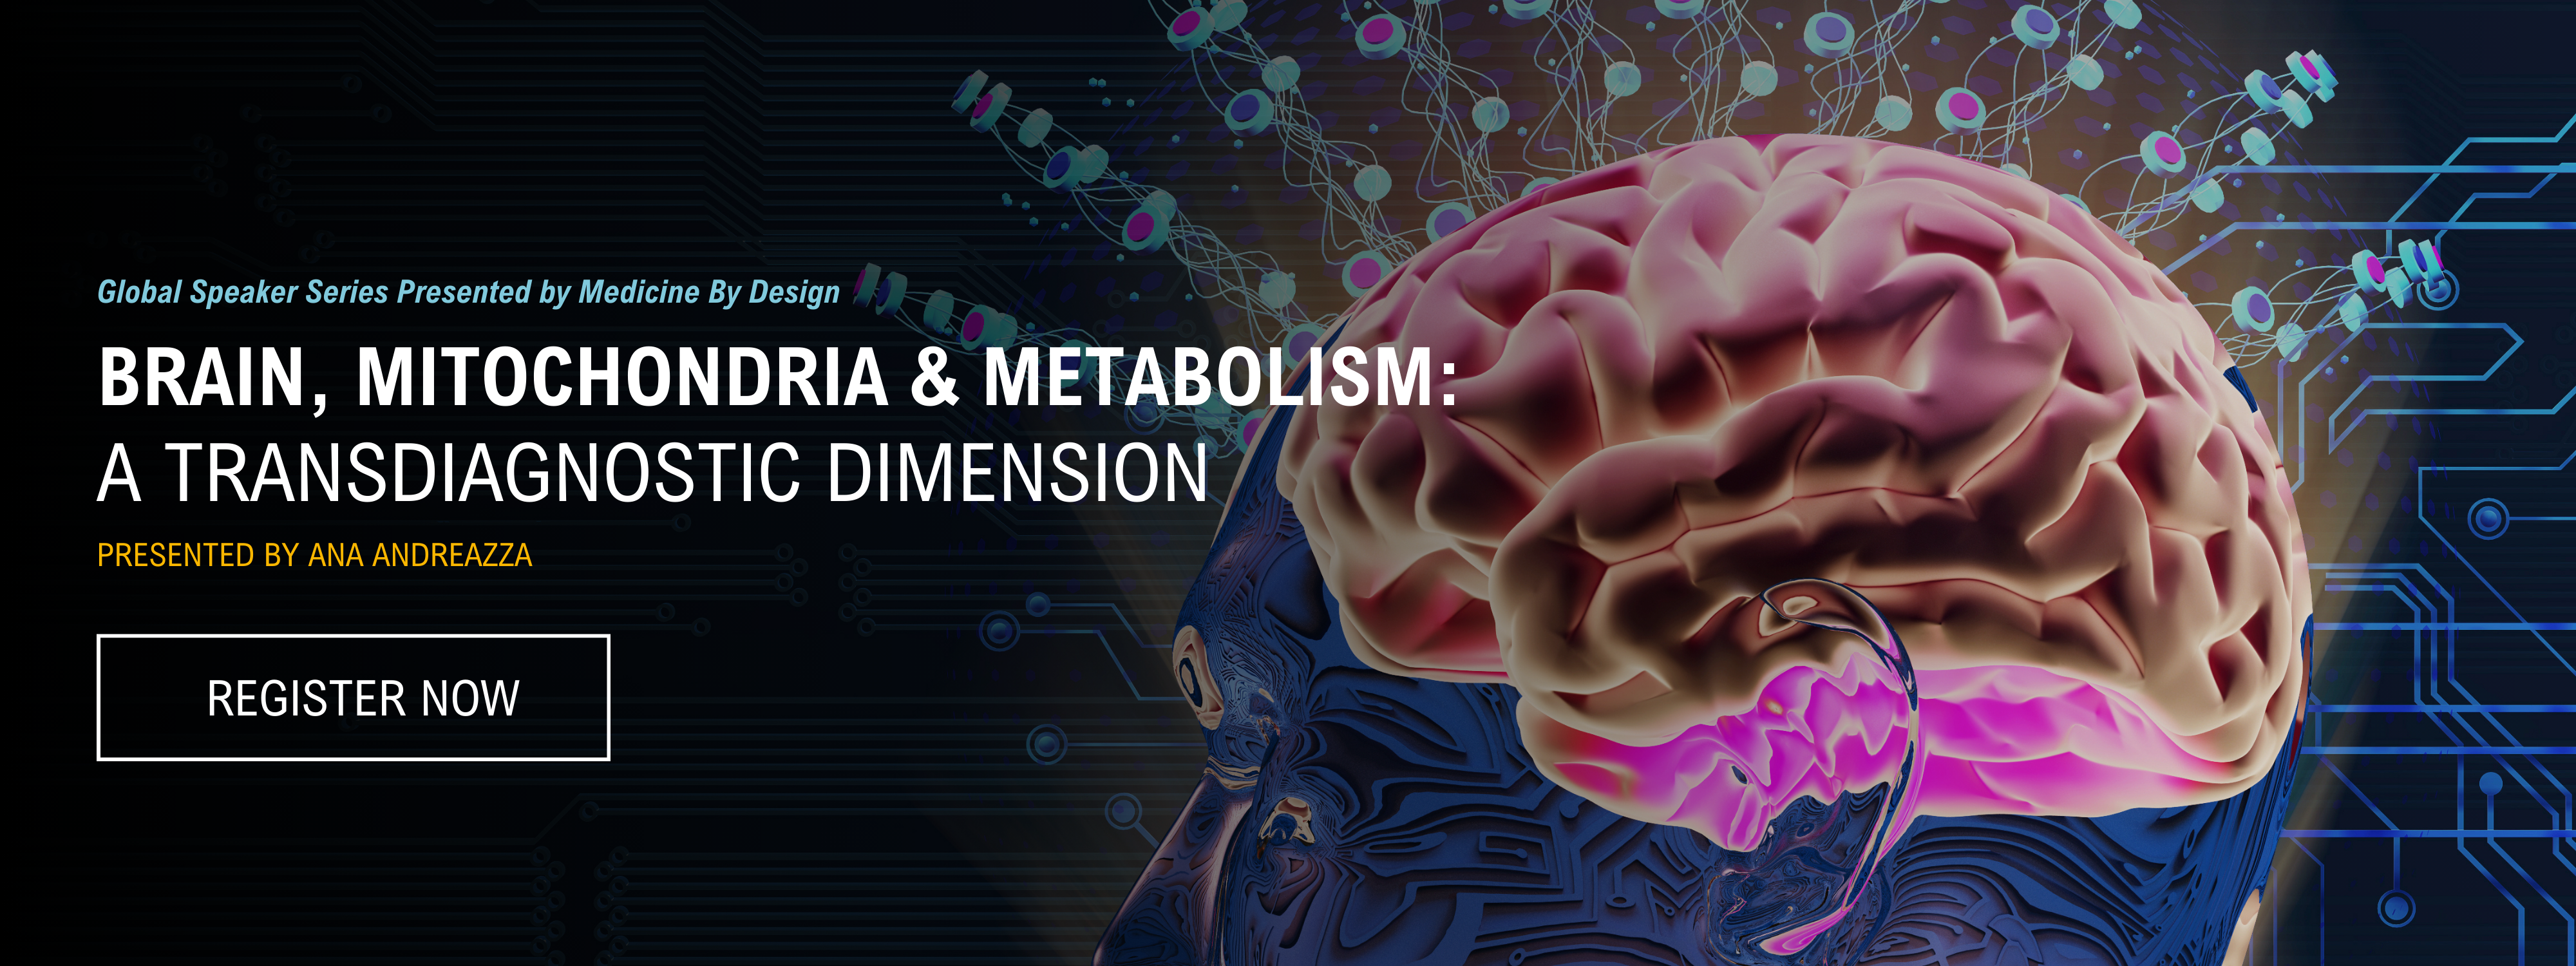 Global Speaker Series Presented By Medicine By Design</p>
<p>Presentation Title: Brain, Mitochondria and Metabolism: A Transdiagnostic Dimension